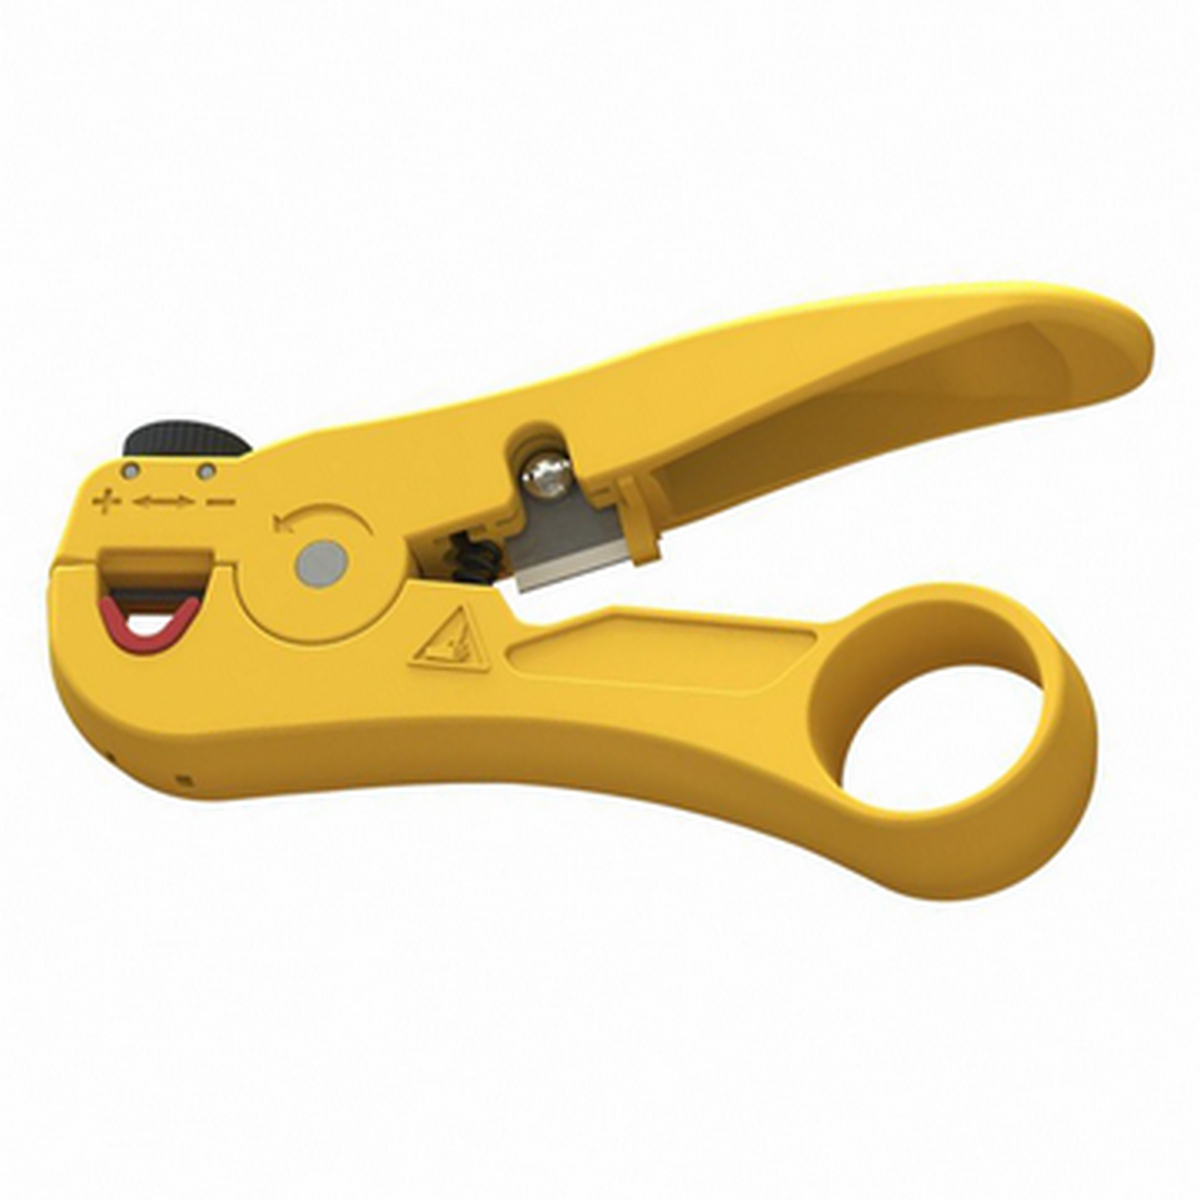 Networking Cable Stripper